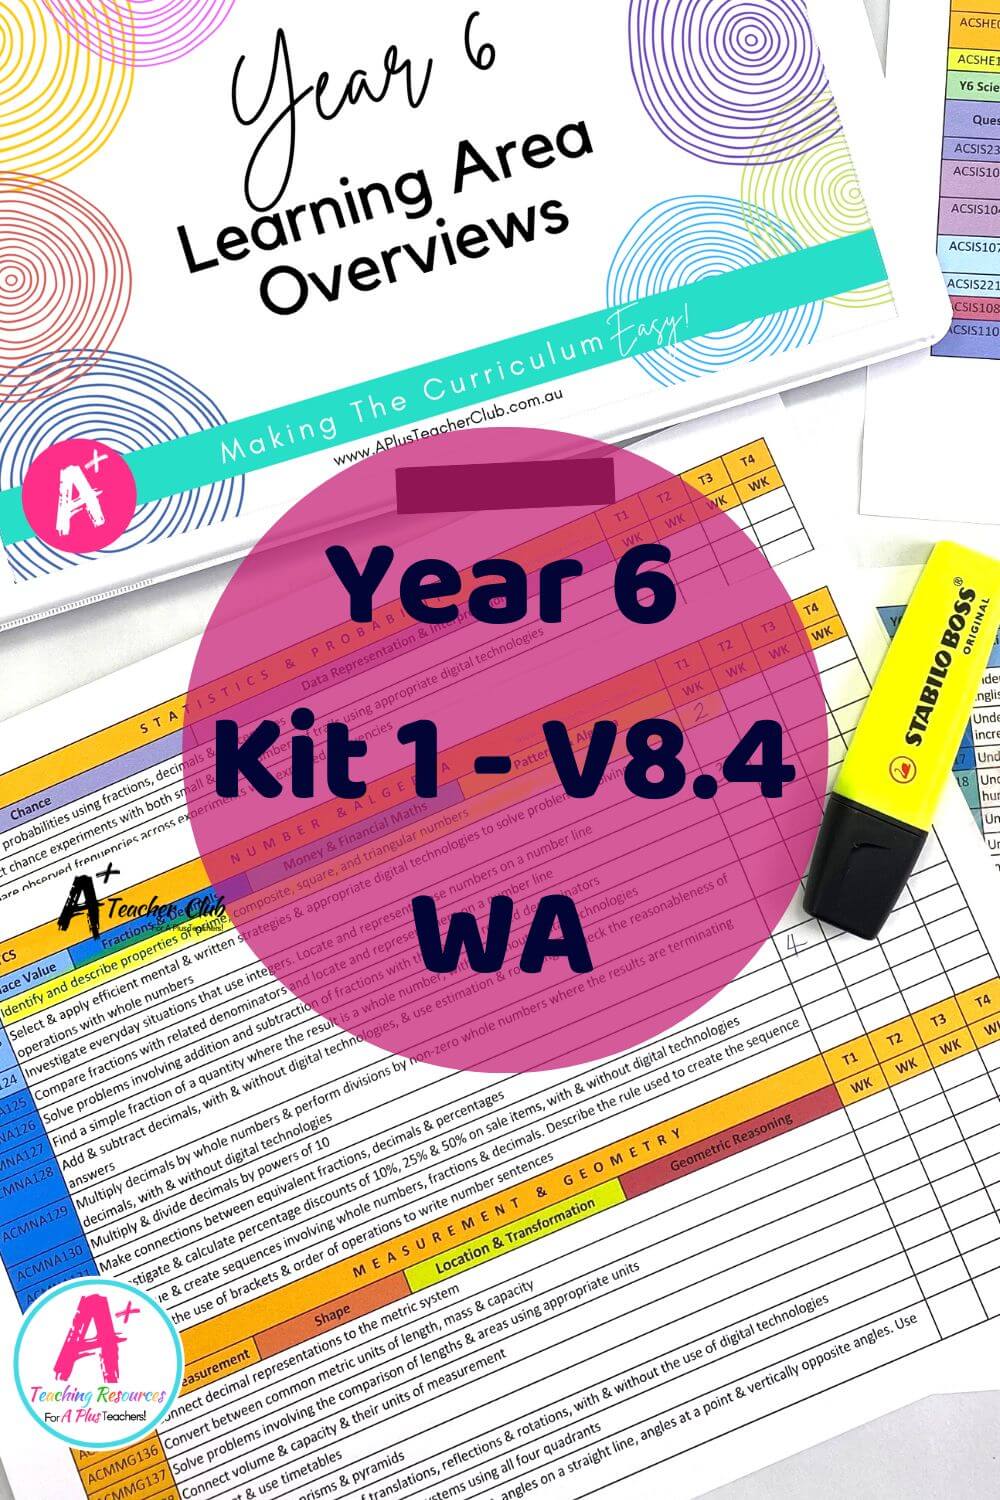 Year 6 Forward Planning Curriculum Overview WA V8.4